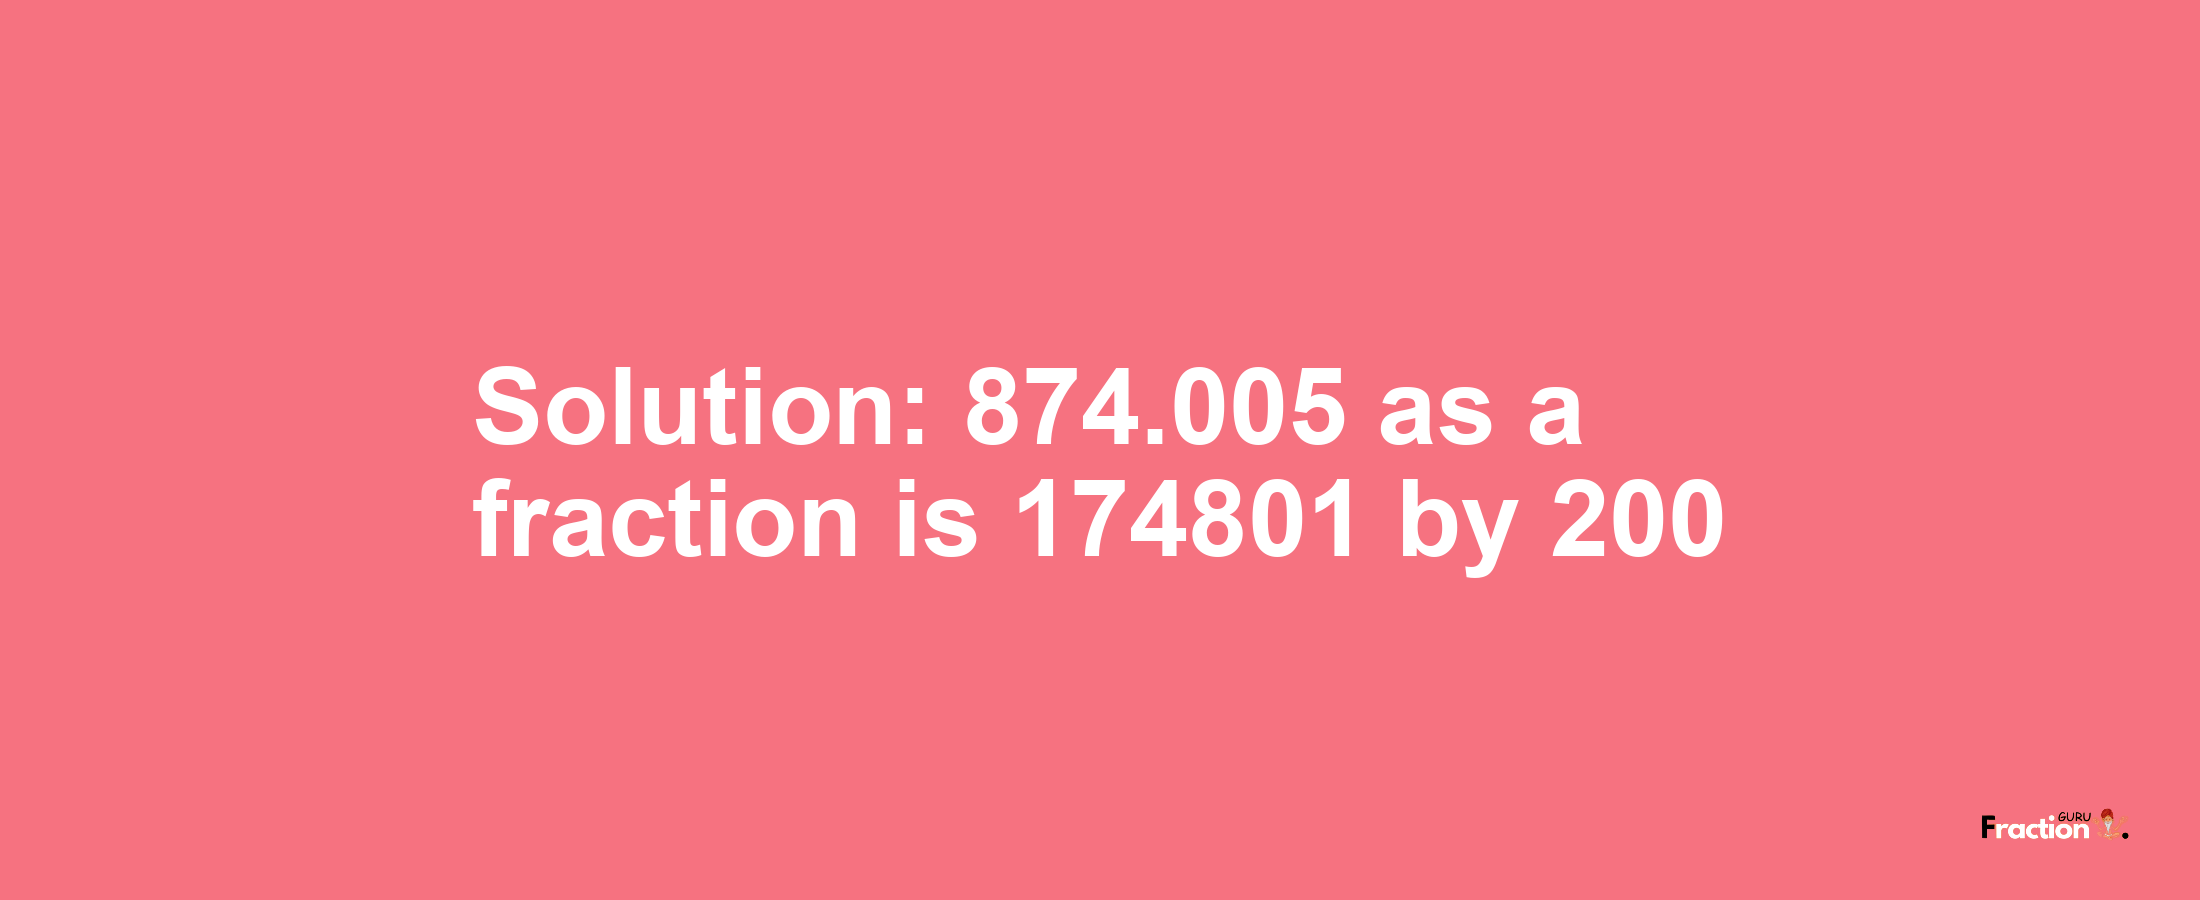 Solution:874.005 as a fraction is 174801/200